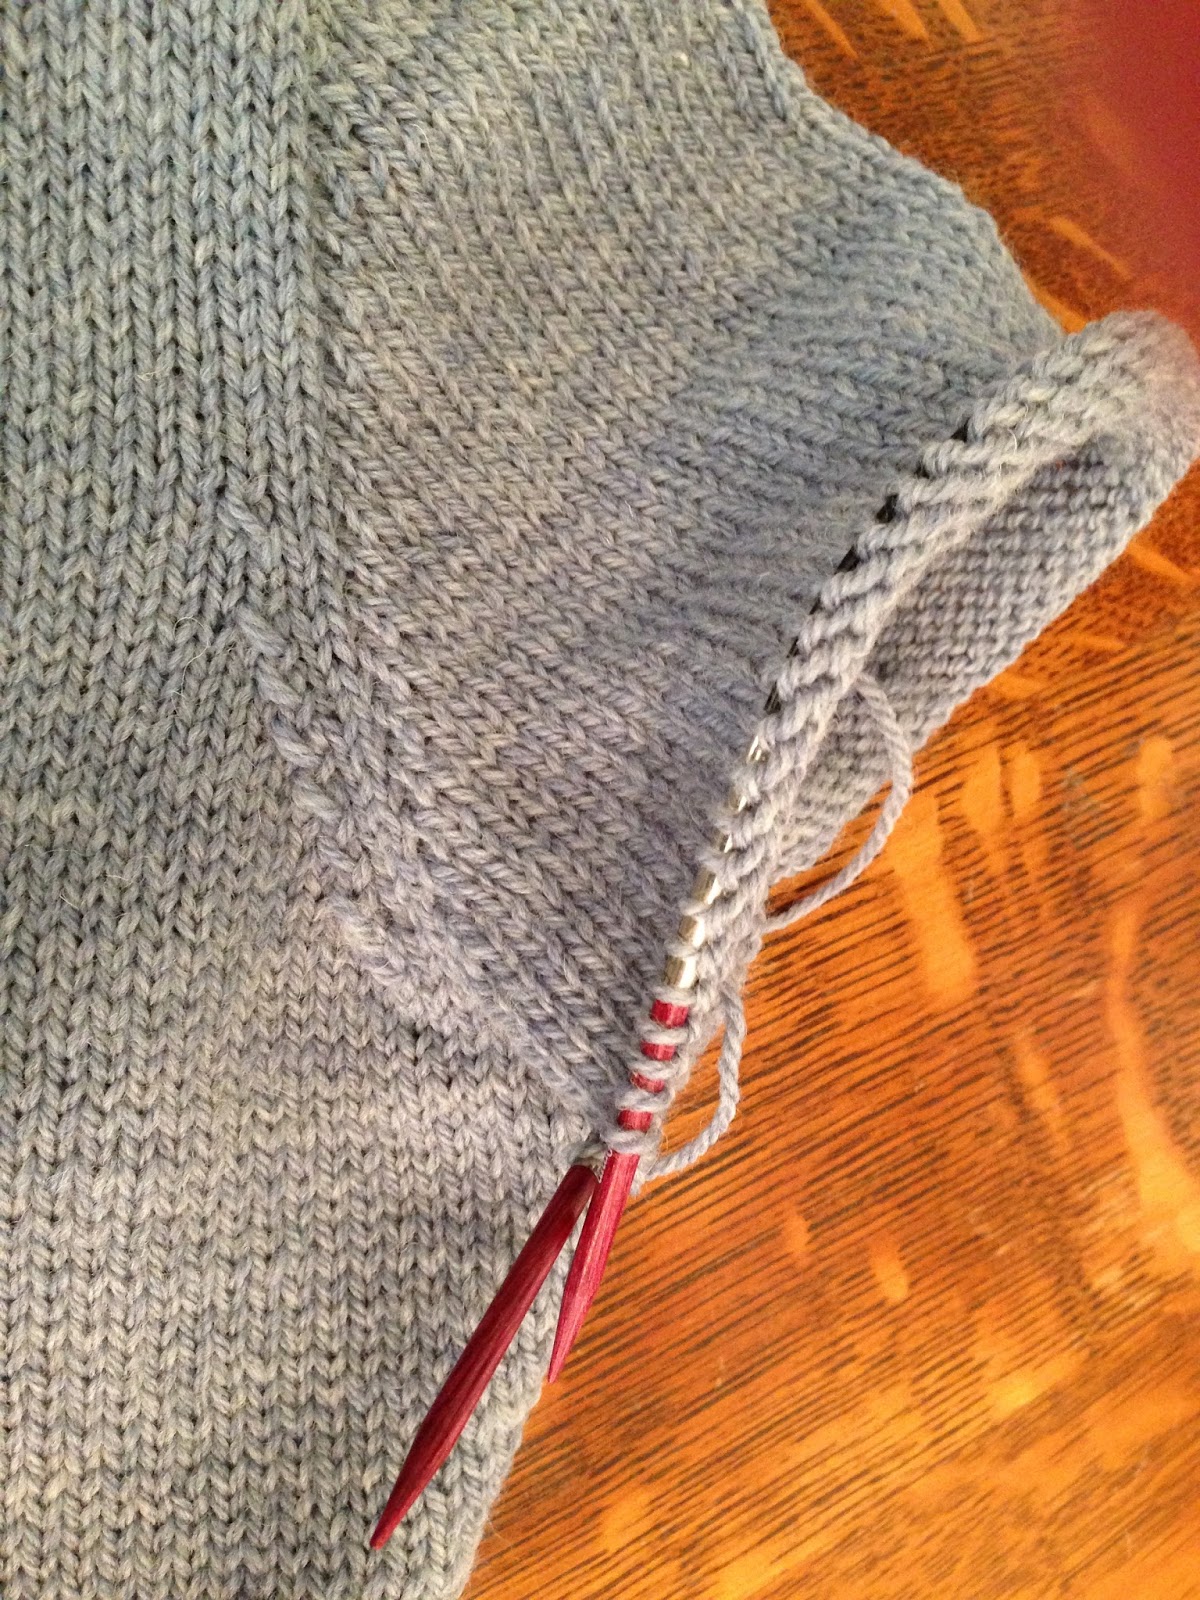 How To Knit A Set In Top Down Sleeve Knitionary